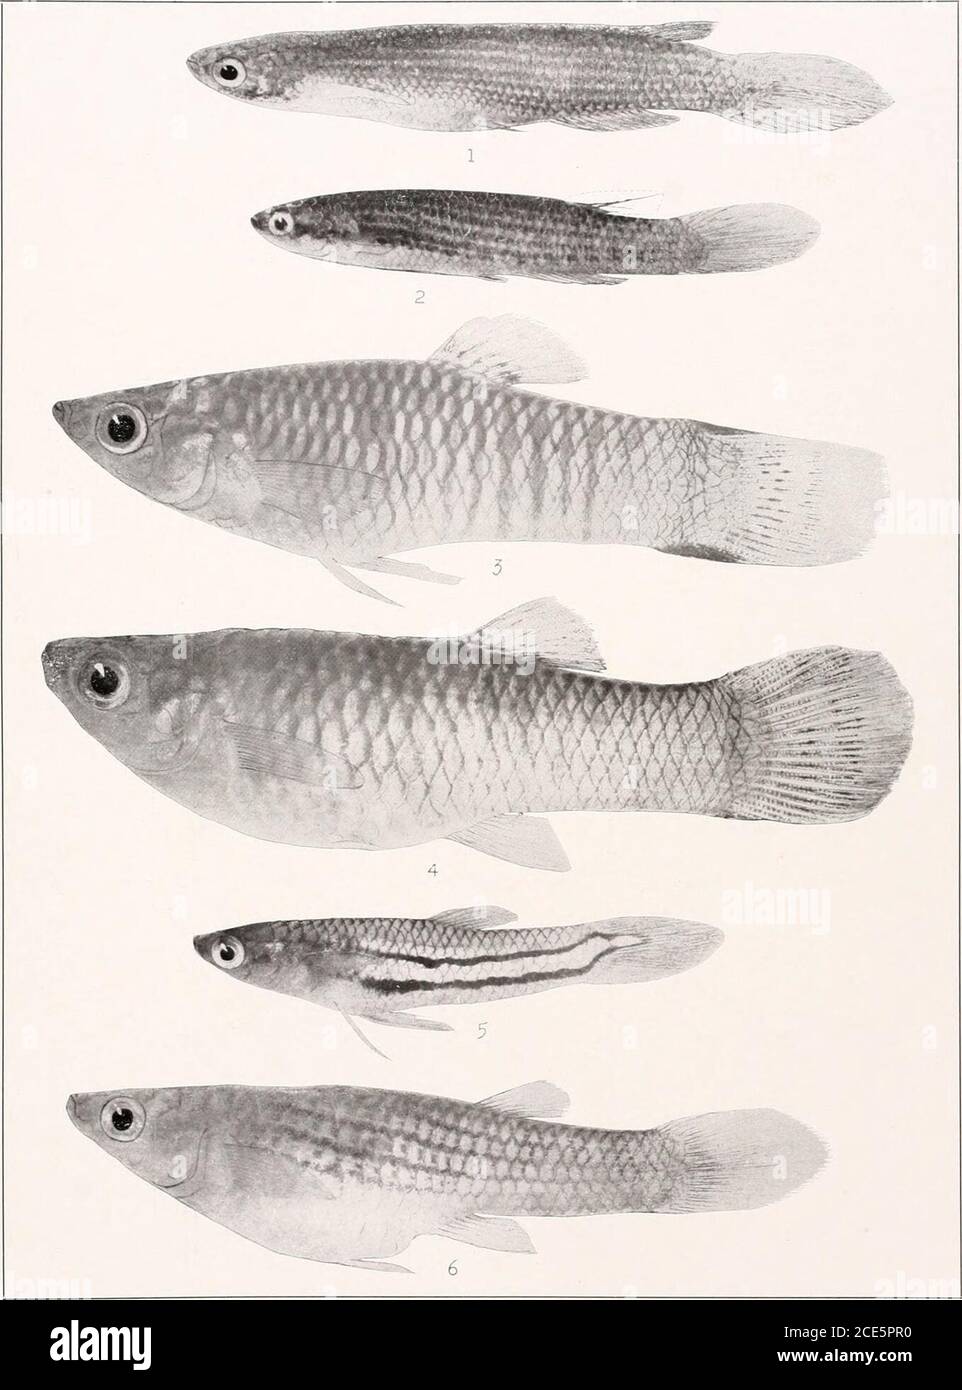 . The freshwater fishes of British Guiana, including a study of the ecological grouping of species and the relation of the fauna of the plateau to that of the lowlands . 1. Rivulusbreviceps Eigenmann. (Type.) 50mm. No. 1075. 2. Rivulusholmia Eigenmann, d. (Co-type.) 63 mm. No. 1077. 3. Rivulus holmia Eigenmann, 2. (Type.) 77 mm. No. L076. 4. Rivuluswaimacui Eigenmann, cf. (Cotype.) SS mm. No. 1079. 5. Rivulus waimacui Eigenmann, 9. (Type.)79 mm. No. 1078. 6. Rivulus stagnahts Eigenmann, cf. (Cotype.) 42 mm. No. 1083. 7. Rivulus stag-natus Eigenmann, v. (Type.) 44 mm. No. L082. Memoirs Carnegie Stock Photo